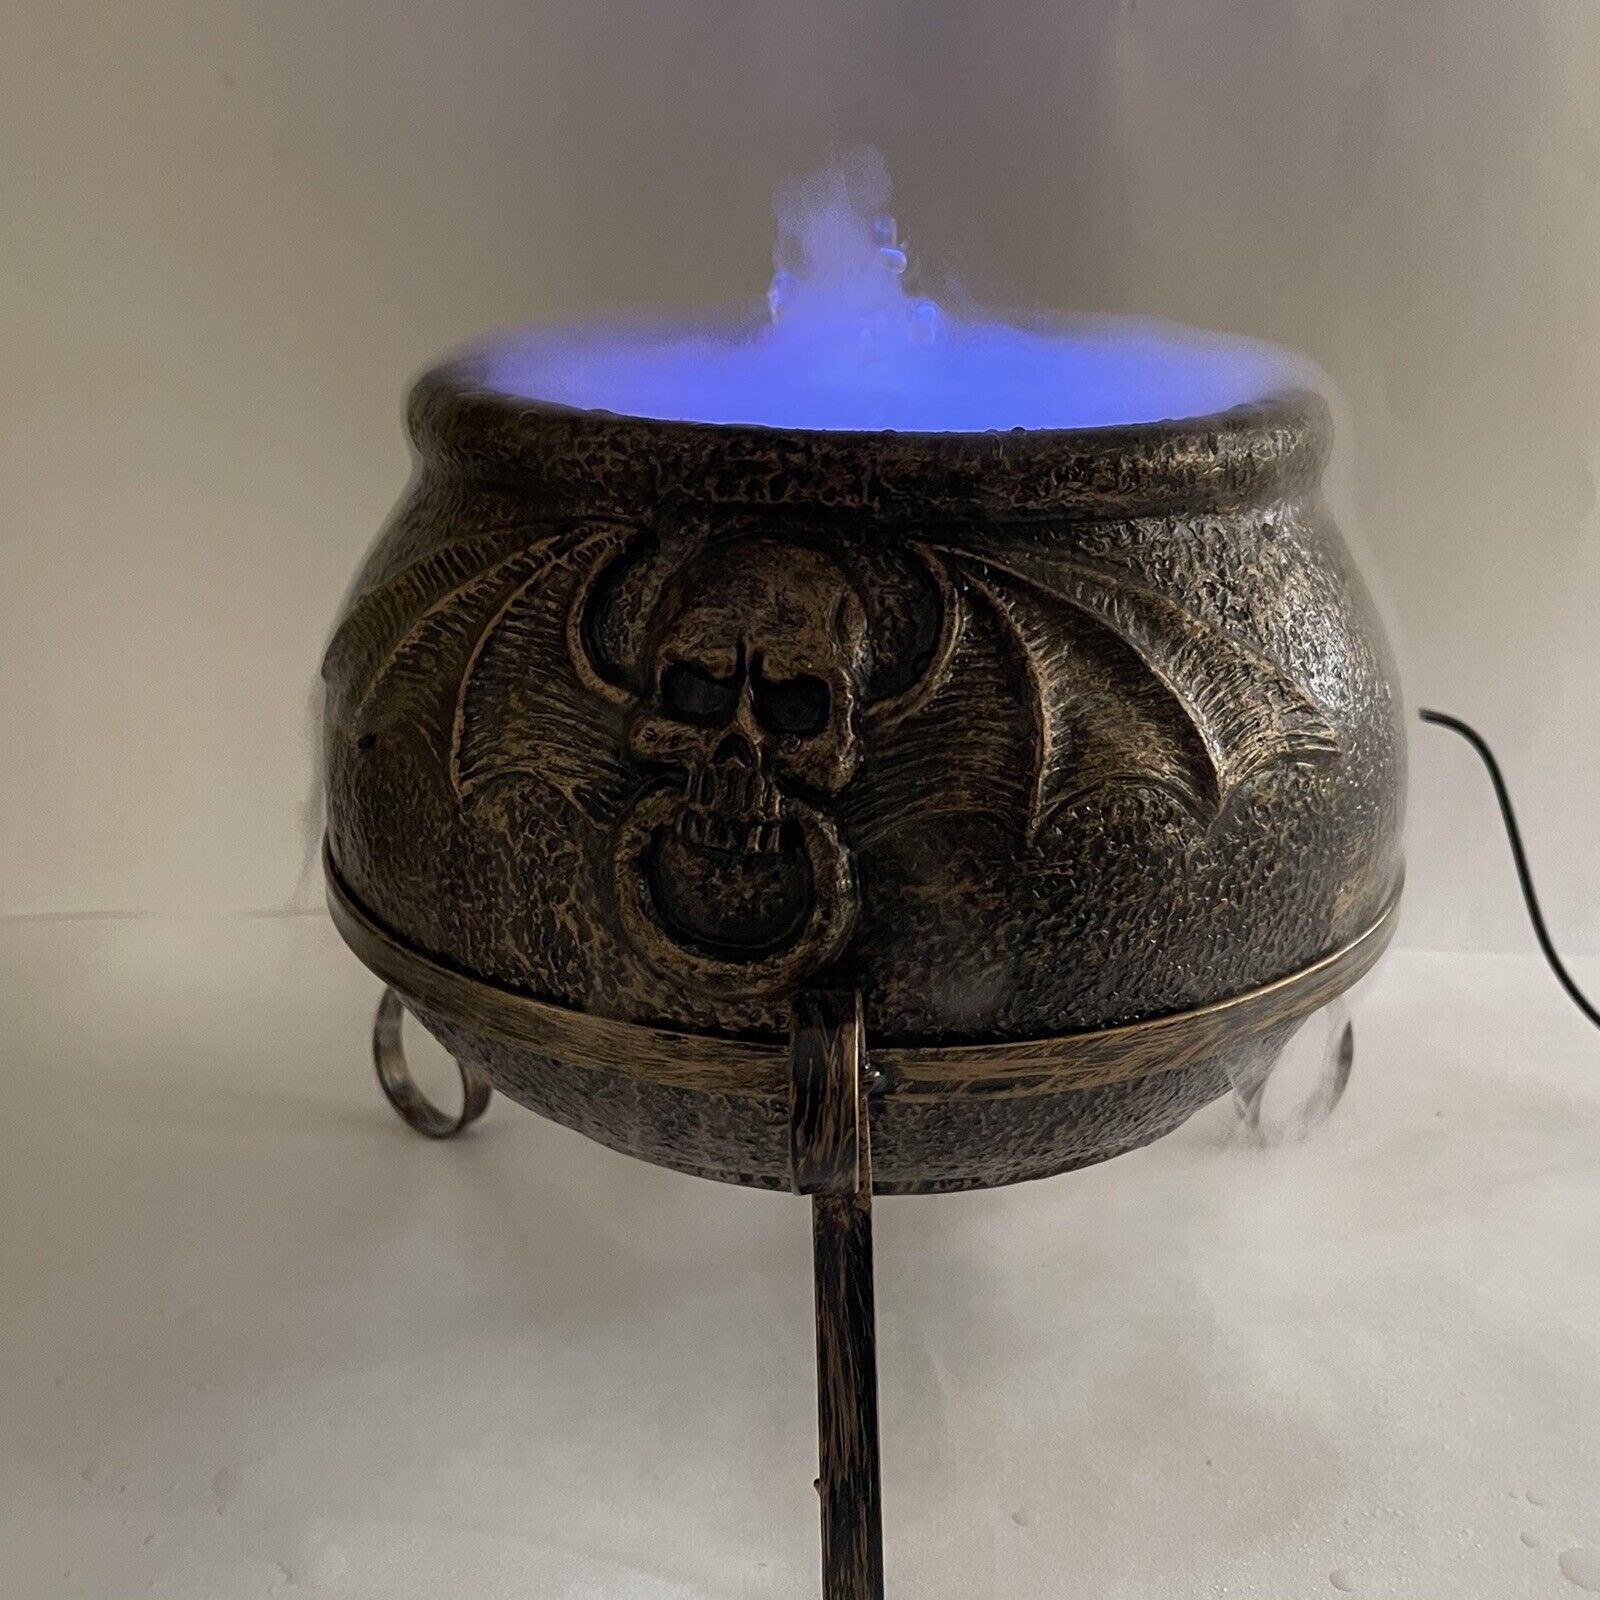 NEW Spirit Halloween Copper Cauldron Mister Multi-Colored Lights uses Tap Water